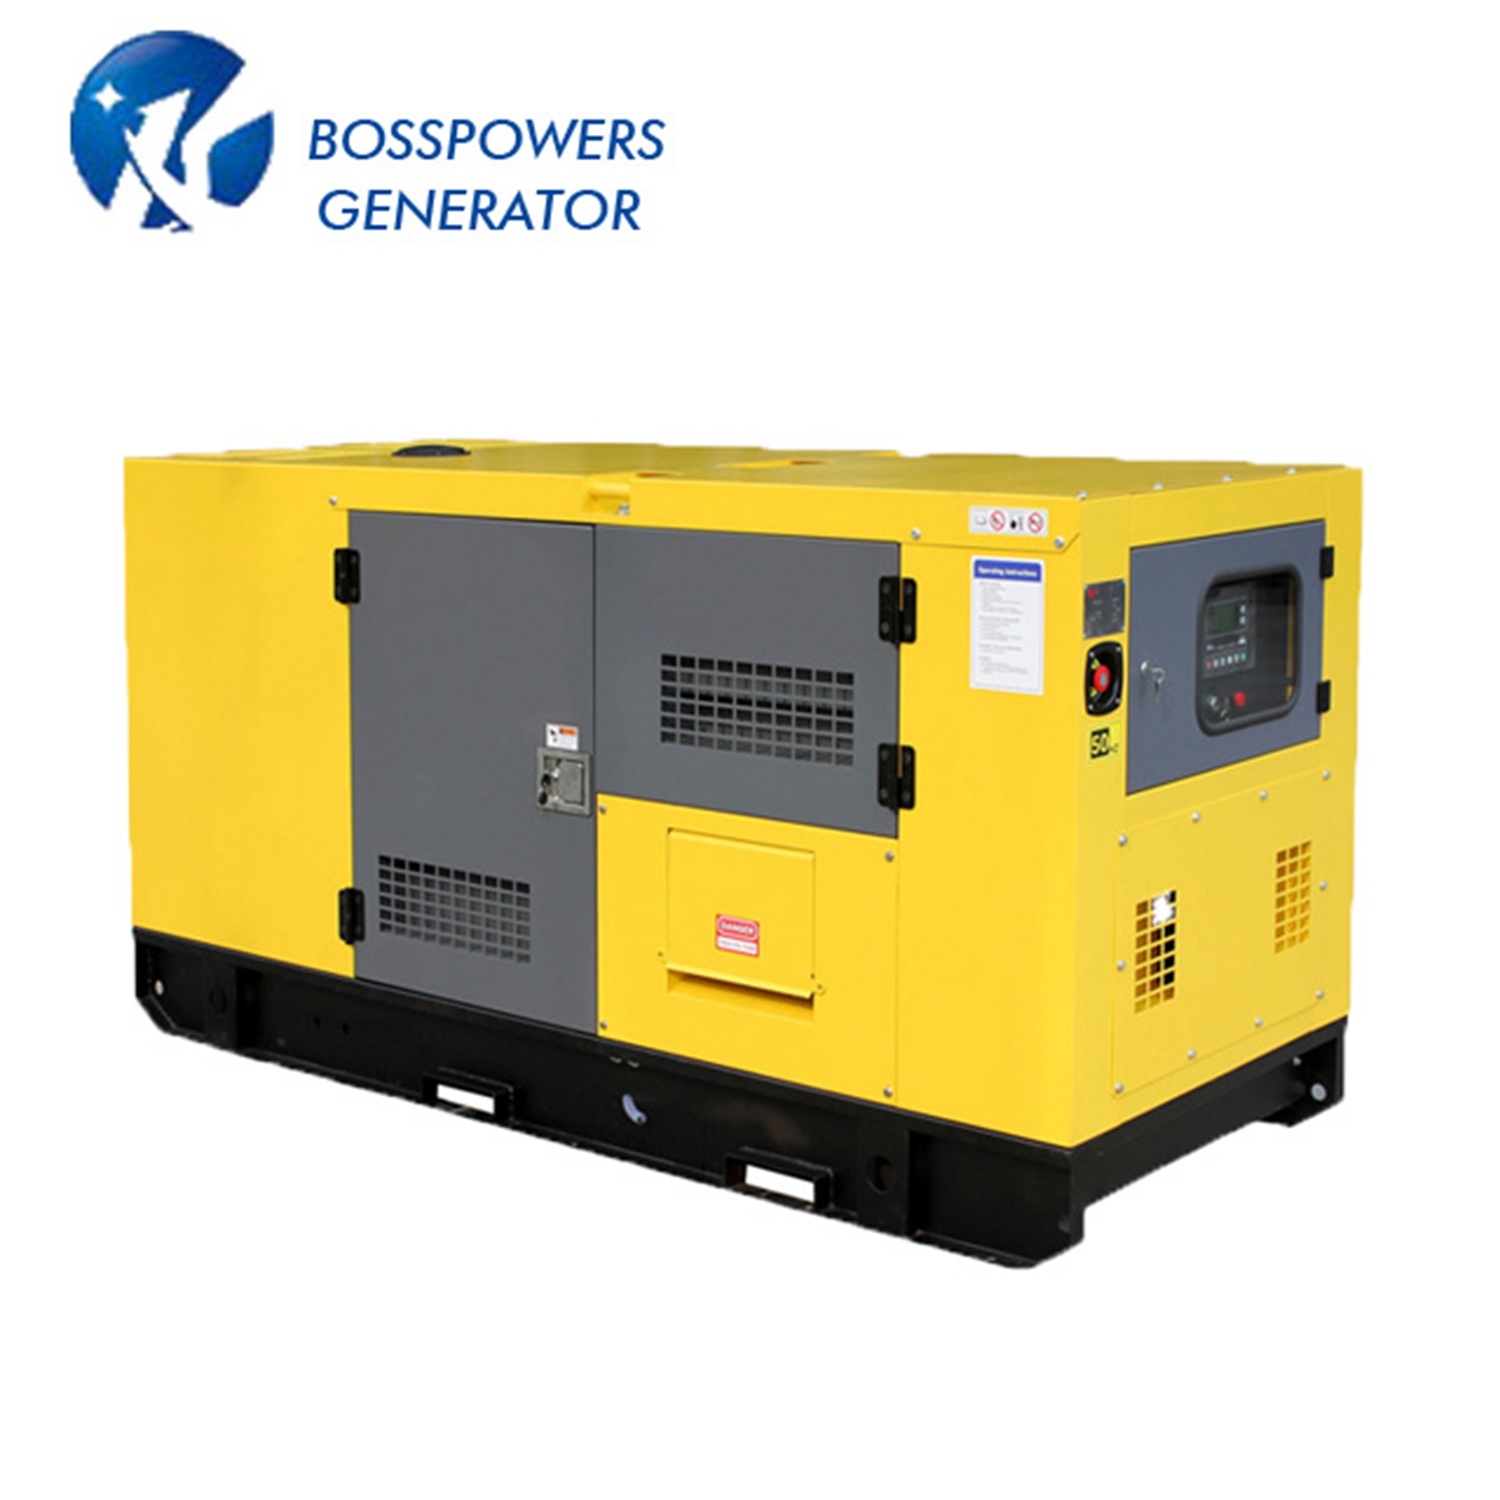 Diesel Generator Boss Brand with High Quality Engine